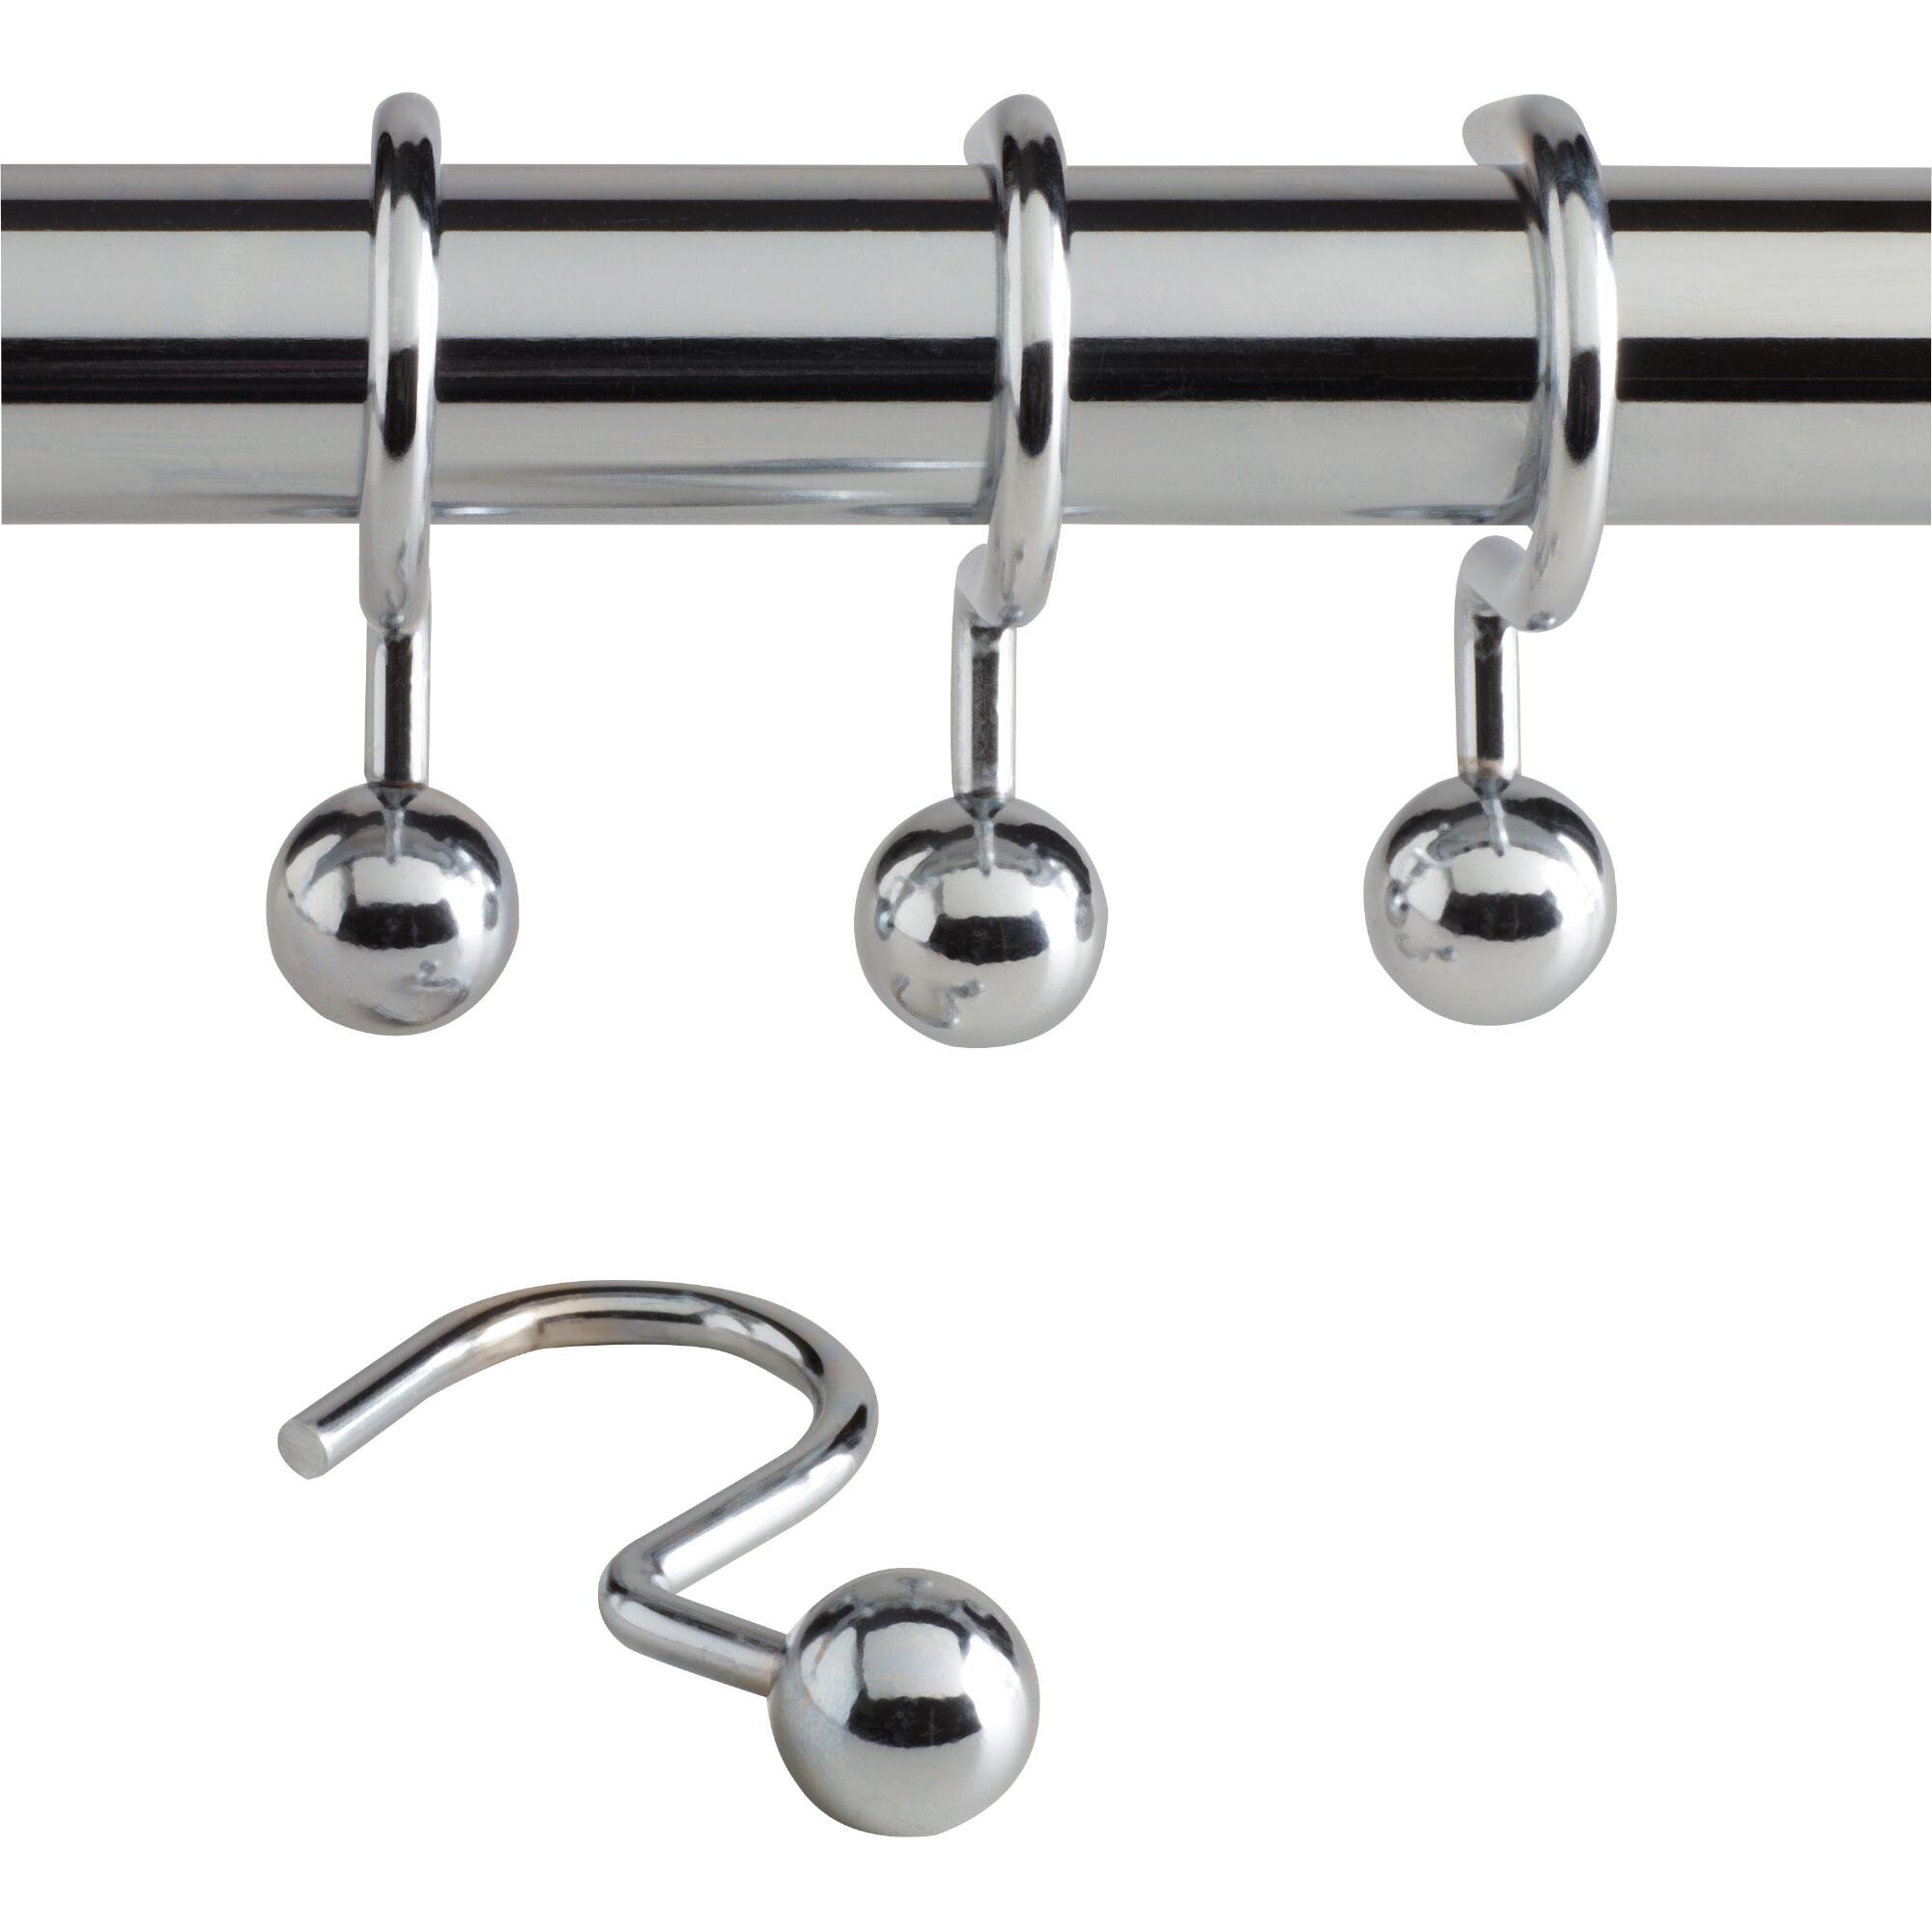 Chrome Ball Hook Shower Curtain Rings, Set of 12 by World Market